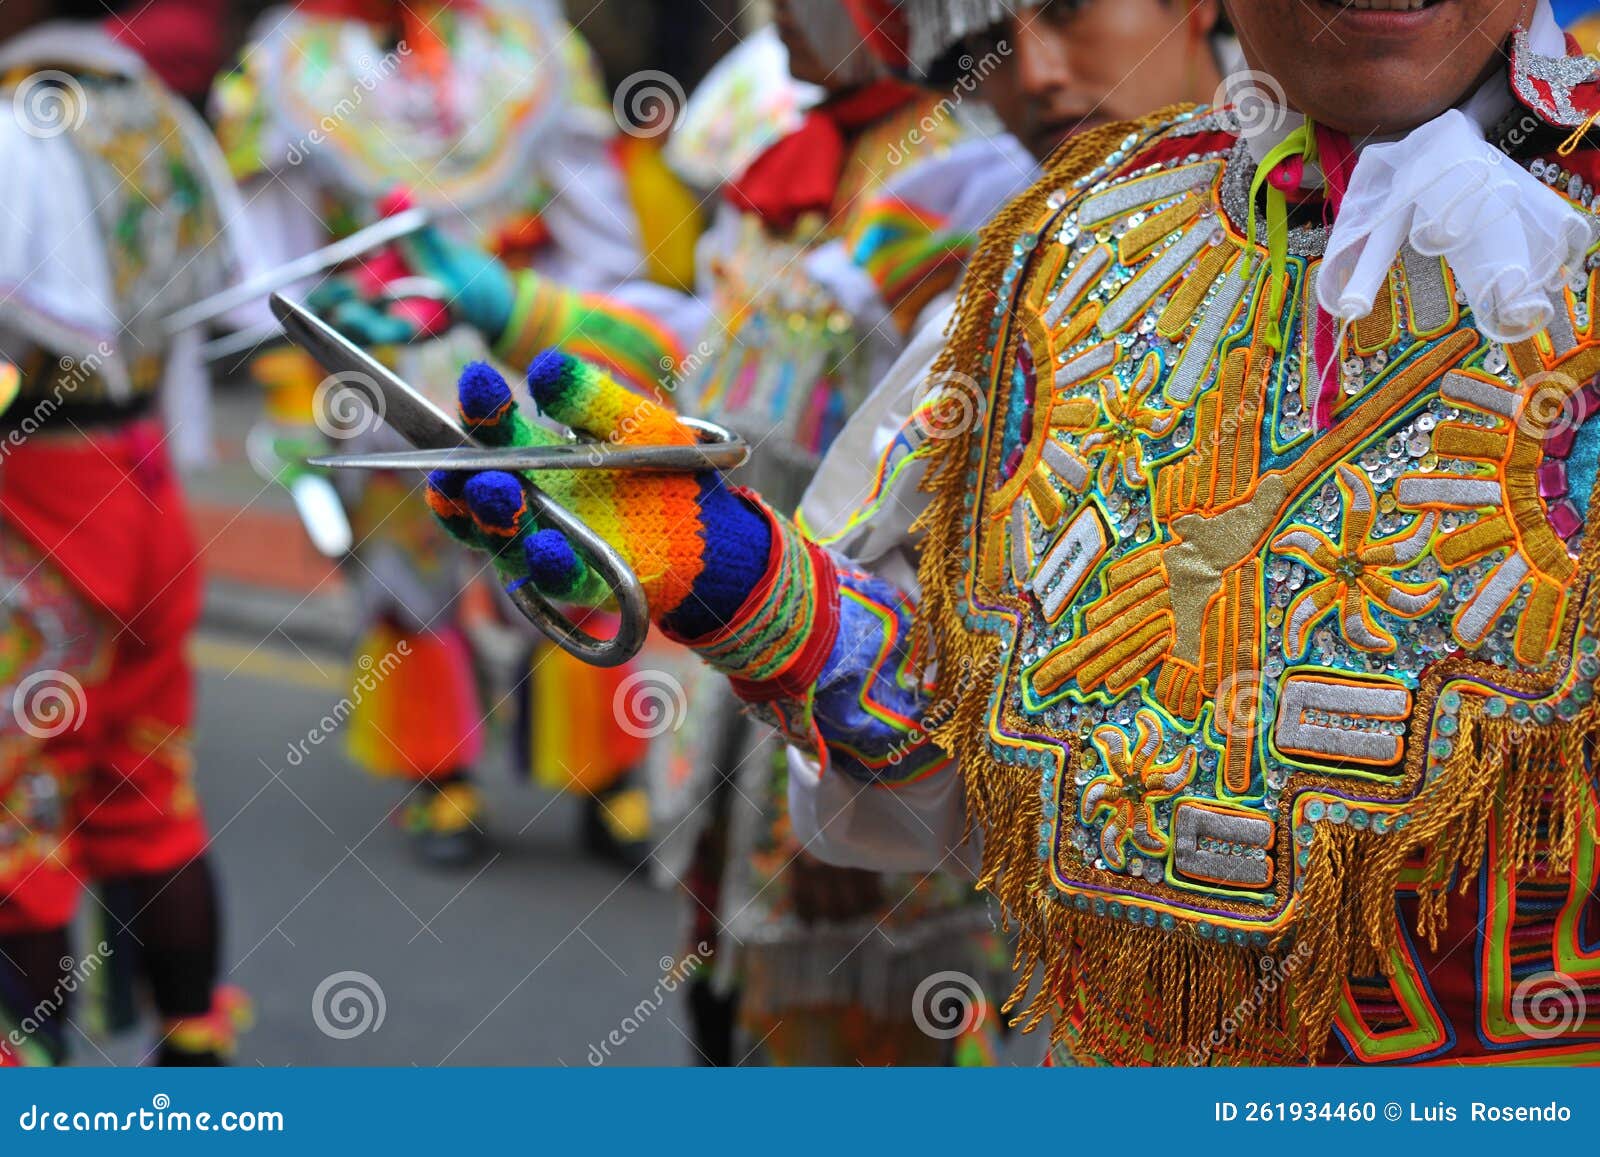 the scissors dance, is an indigenous religious dance, originally from ayacucho, it is also danced in huancavelica and apurÃÂ­mac.